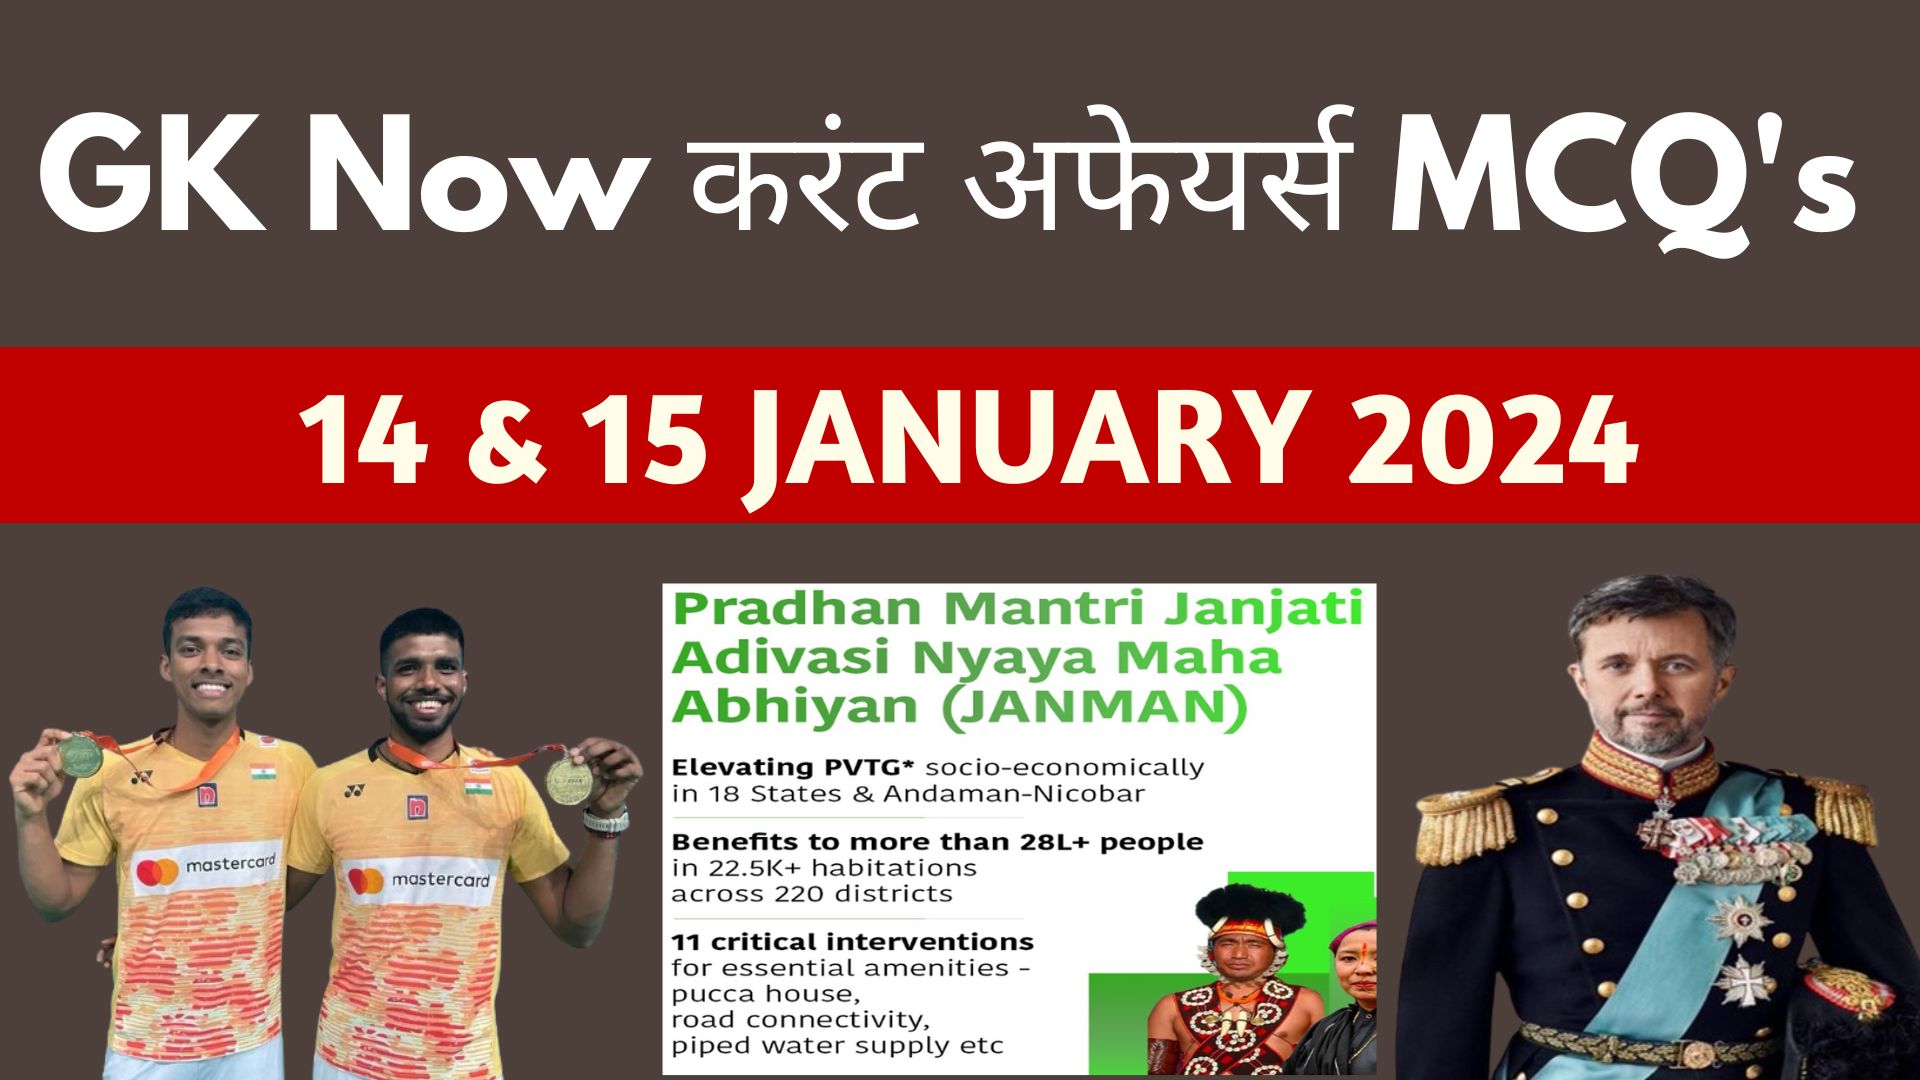 Daily Current Affairs MCQ 14 & 15 January 2024 GK Now